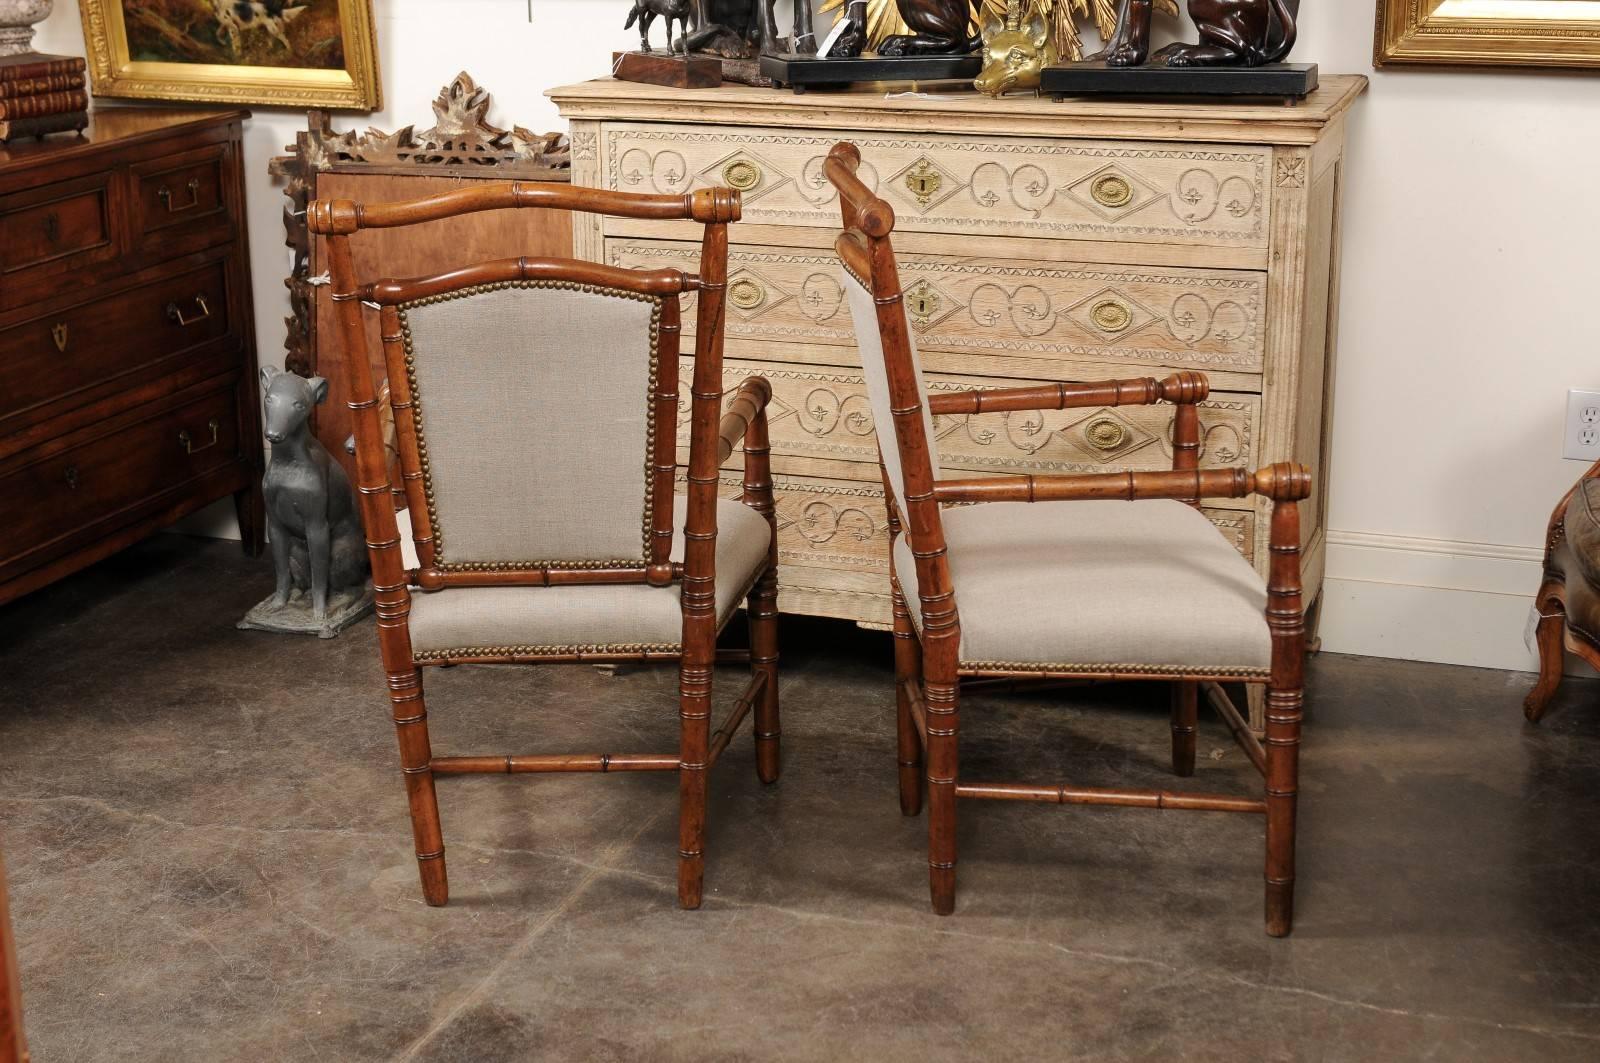 Upholstery Pair of English 1900s Faux-Bamboo Armchairs with Turned Legs and Stretchers